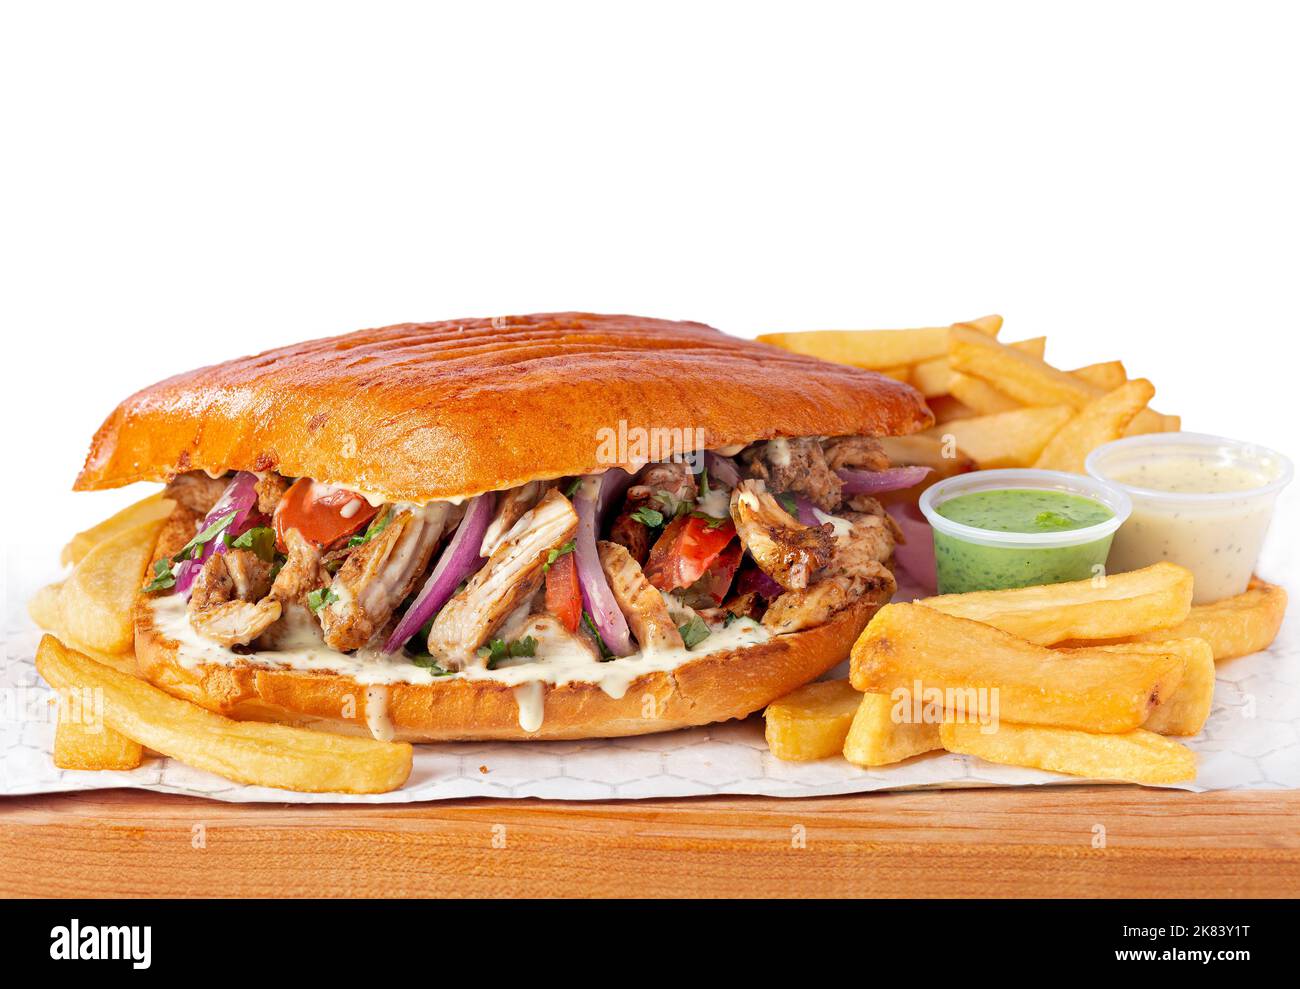 Large Peruvian Lomo saltado chicken sandwich with French fries on a white background Stock Photo